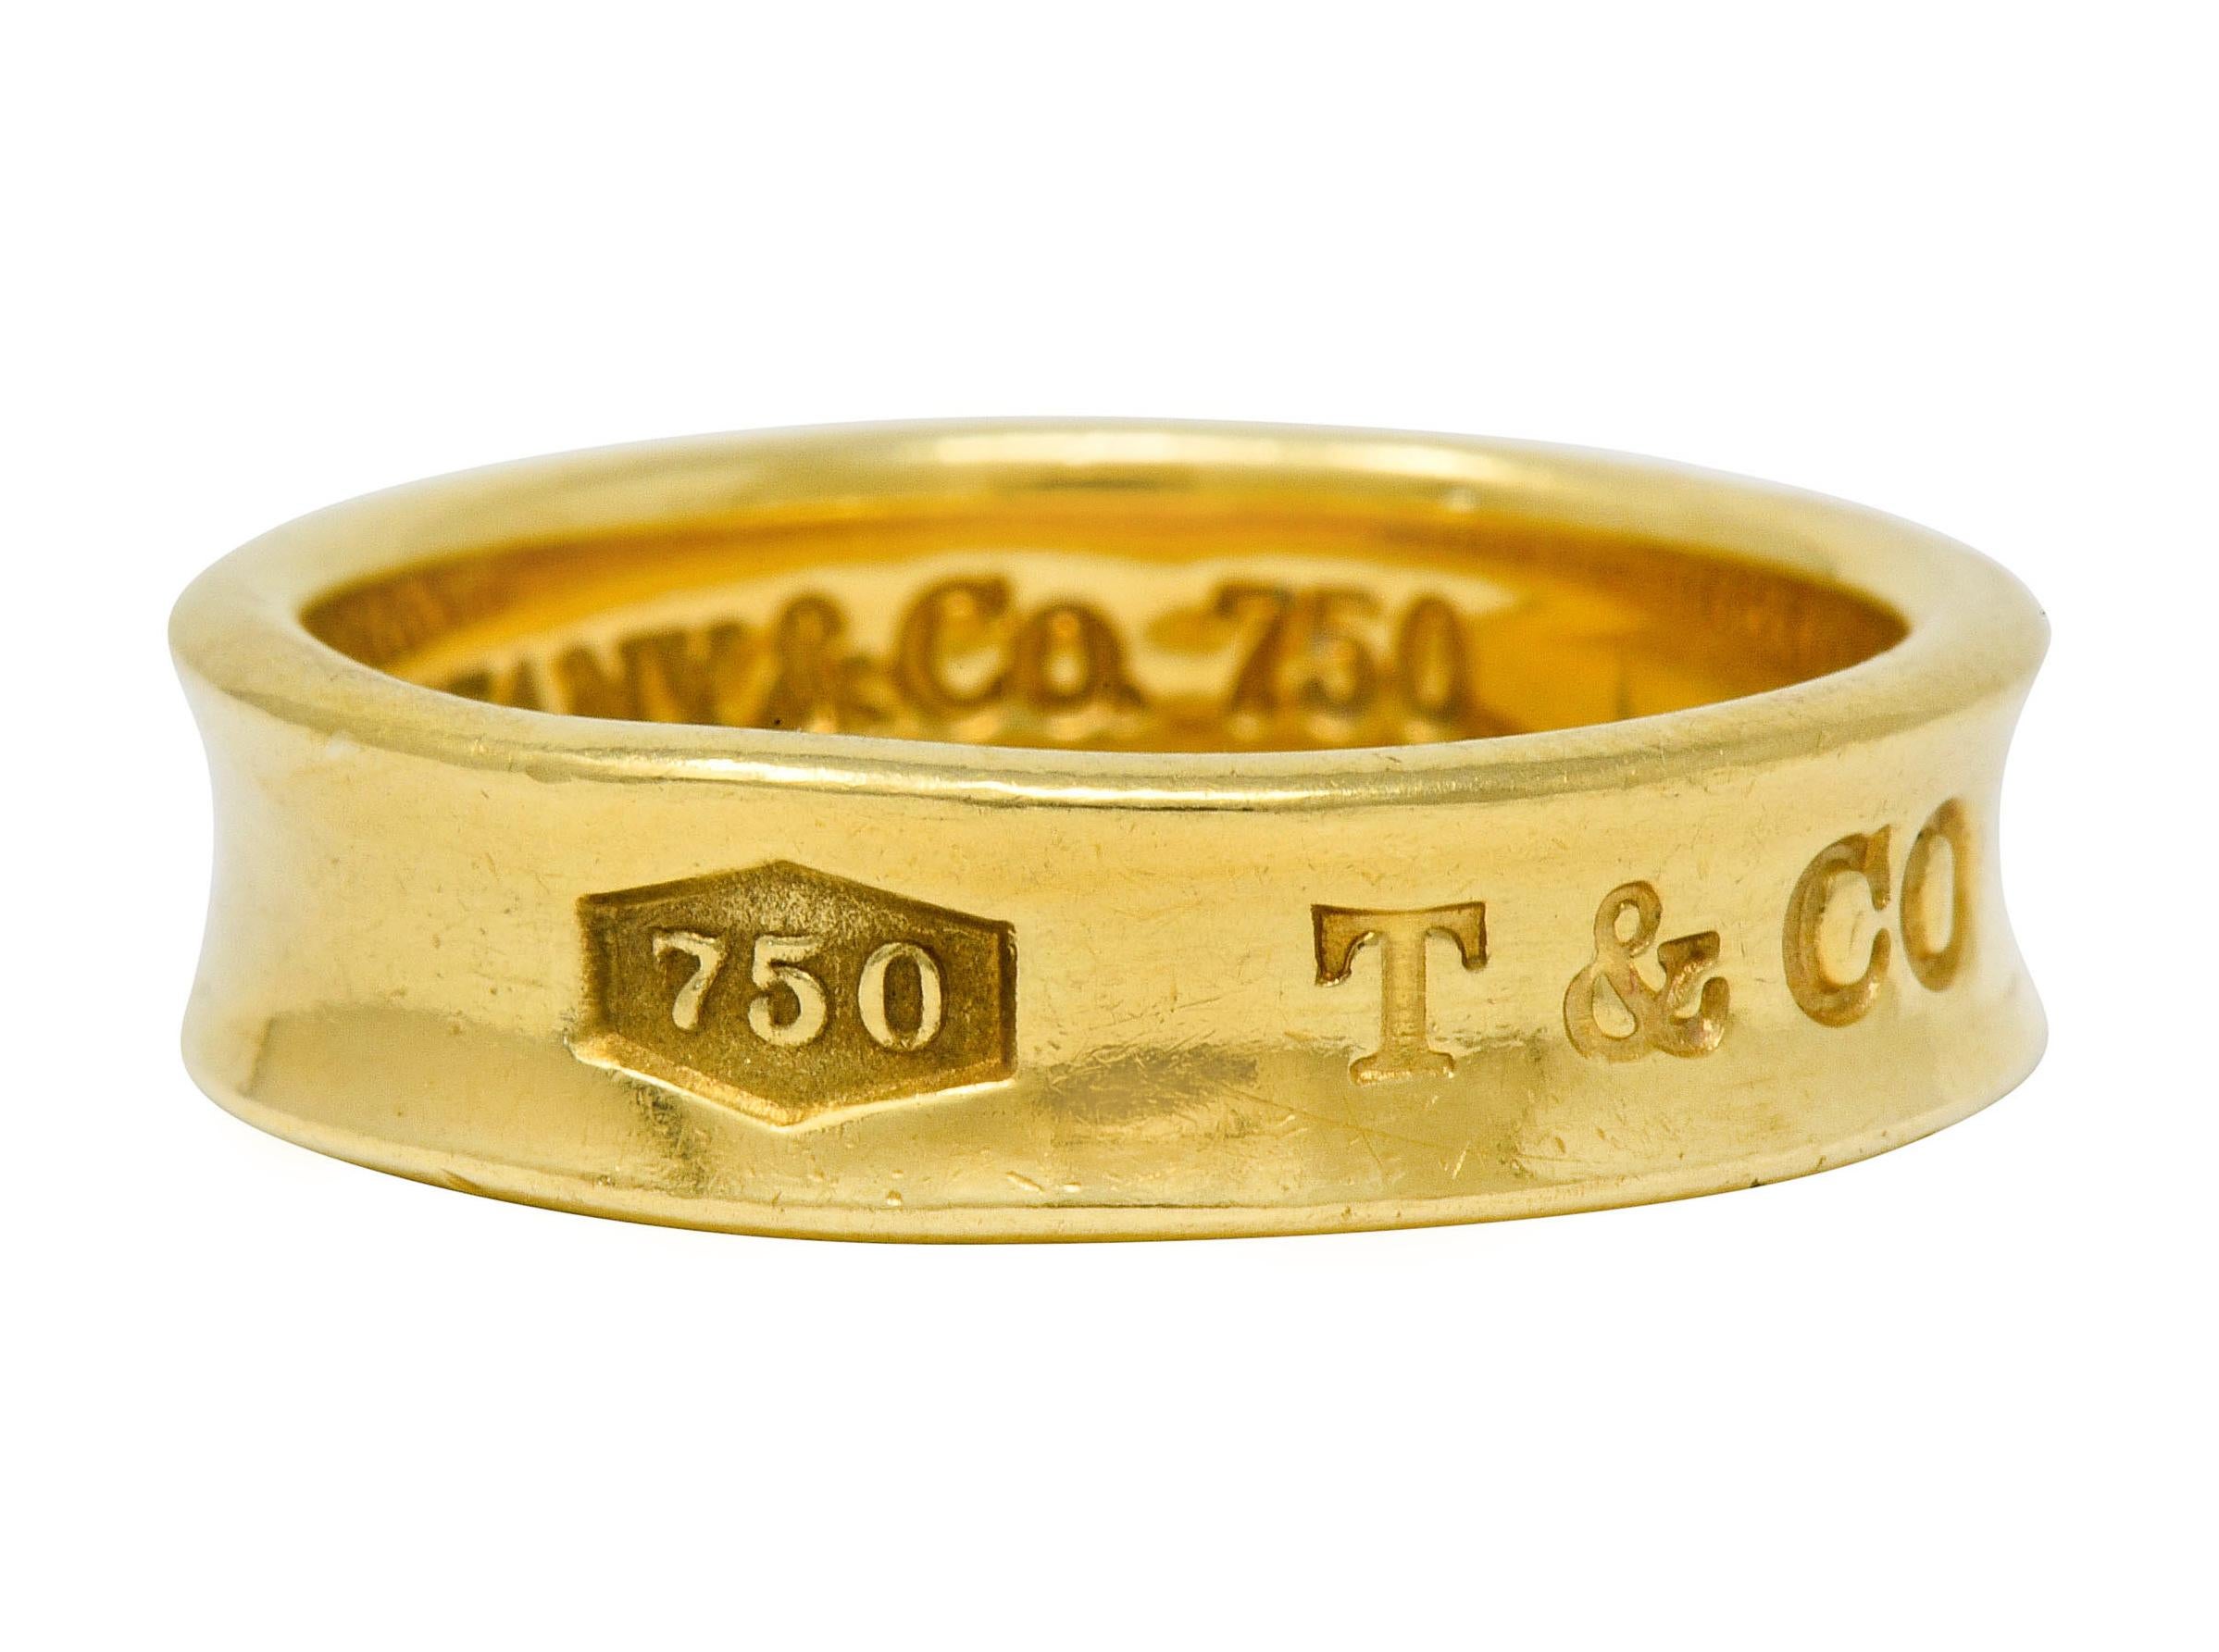 High polished gold band with recessed central groove

Deeply engraved to front 750, T & Co, and 1837

Inner shank fully signed Tiffany & Co. 1997

Stamped 750 for 18 karat gold

From the celebratory Tiffany 1837 collection

Ring Size: 9 1/2 & not